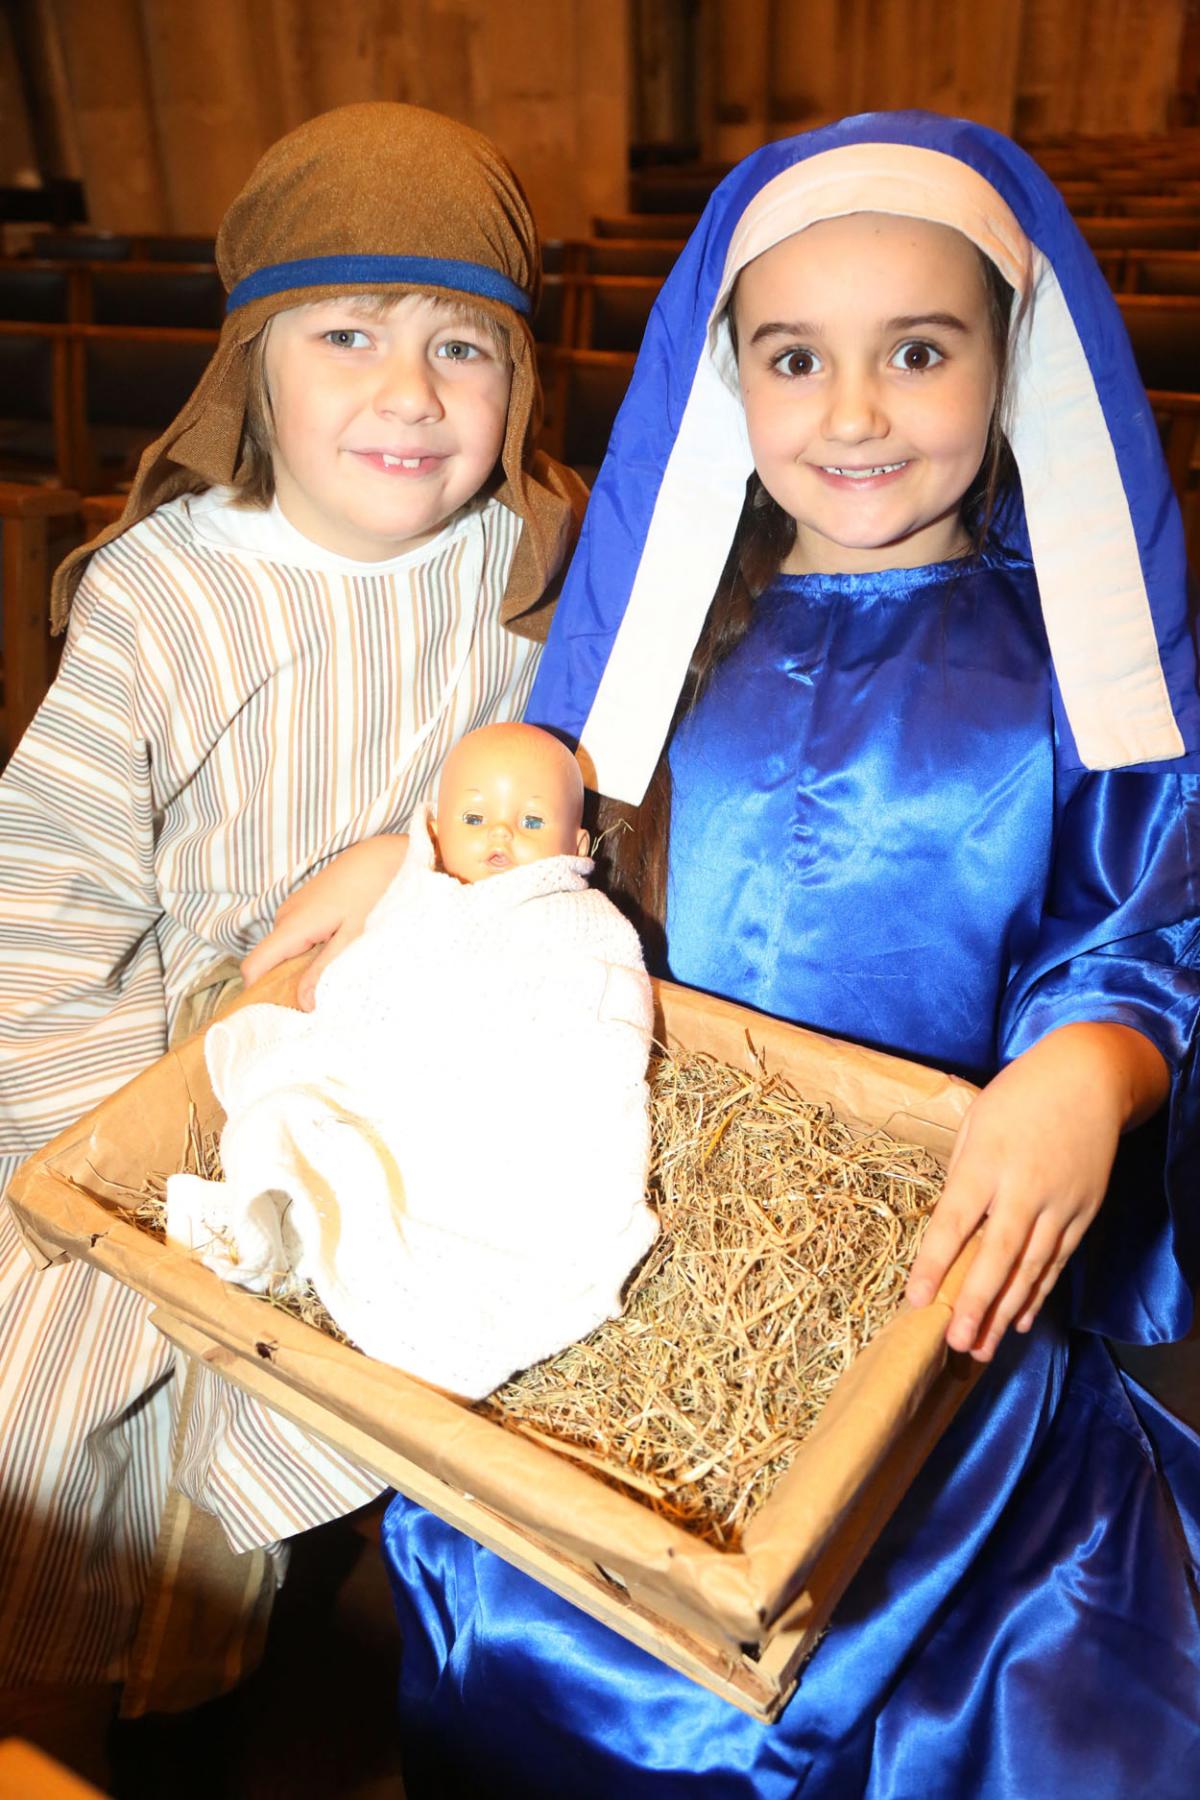 Pictures by Sam Sheldon.  25% off nativity photo prints,  just add echosave25 at the checkout